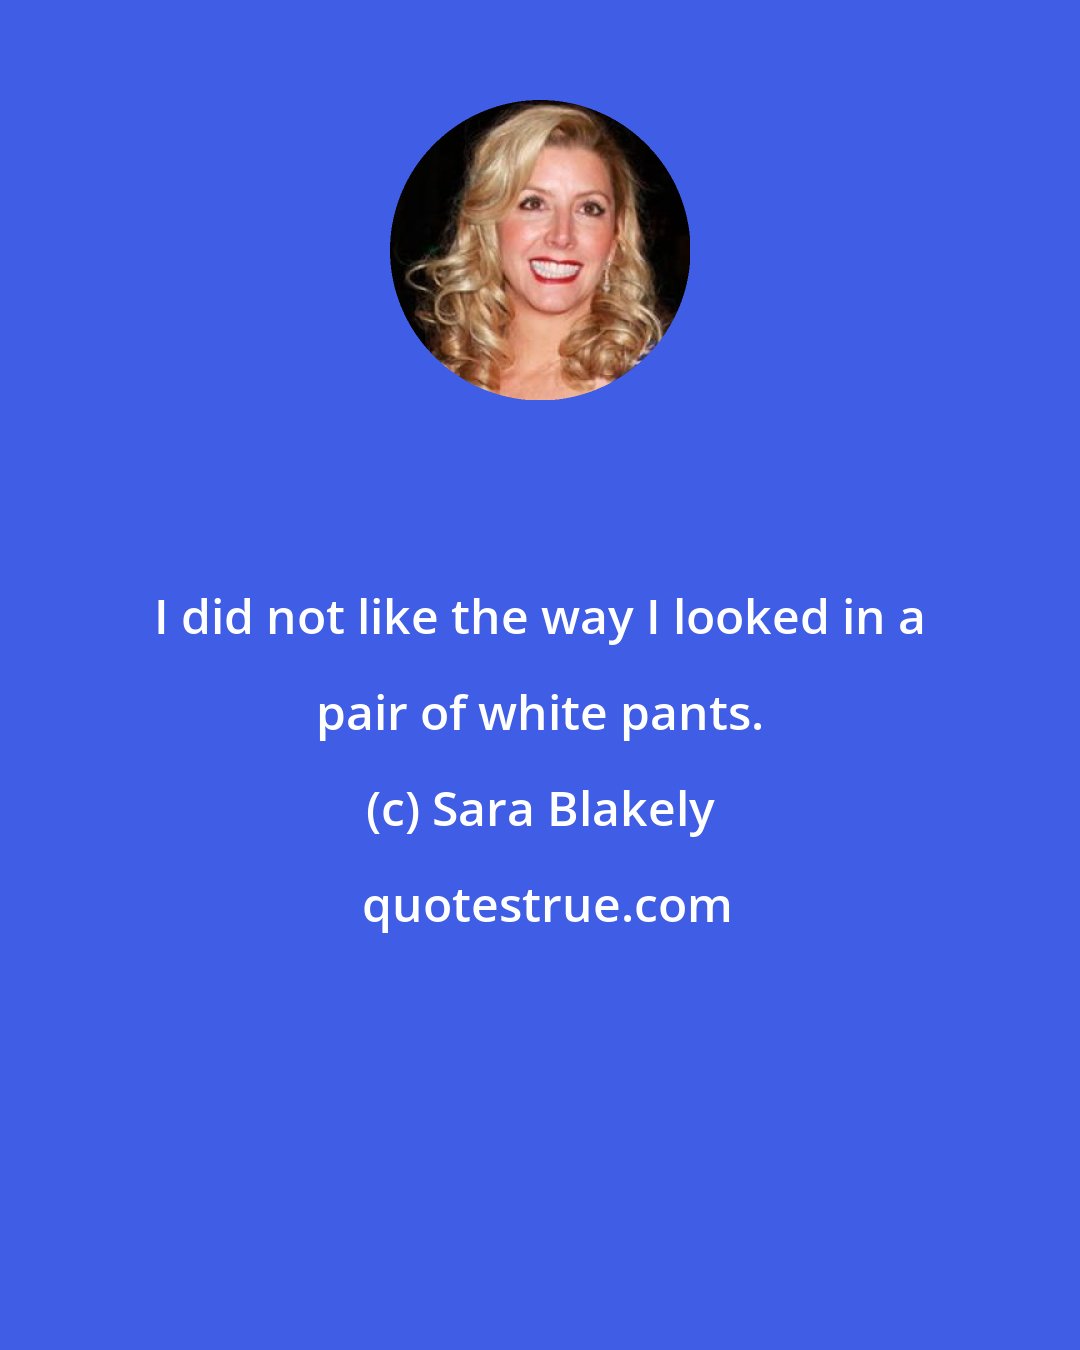 Sara Blakely: I did not like the way I looked in a pair of white pants.